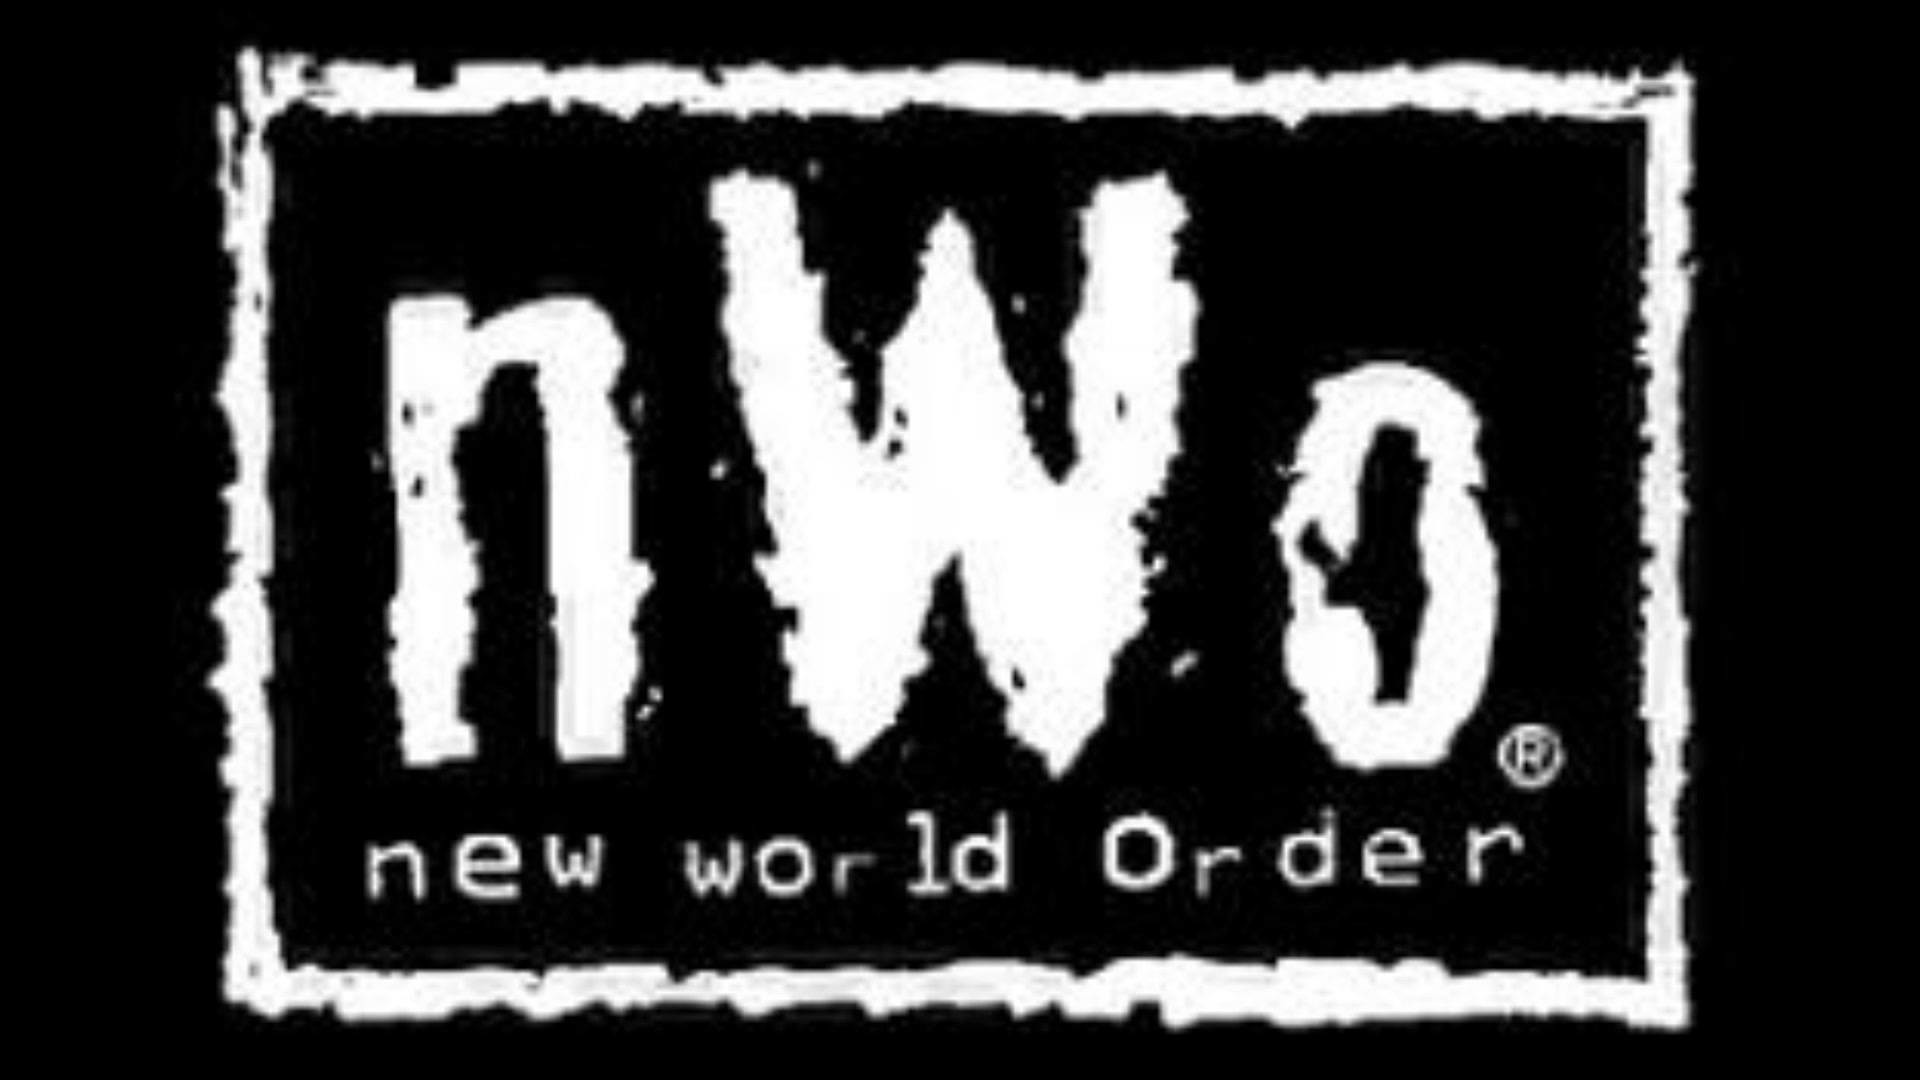 1920x1080 WWE nWo 2012 predictions. COME WATCH PLEASE!